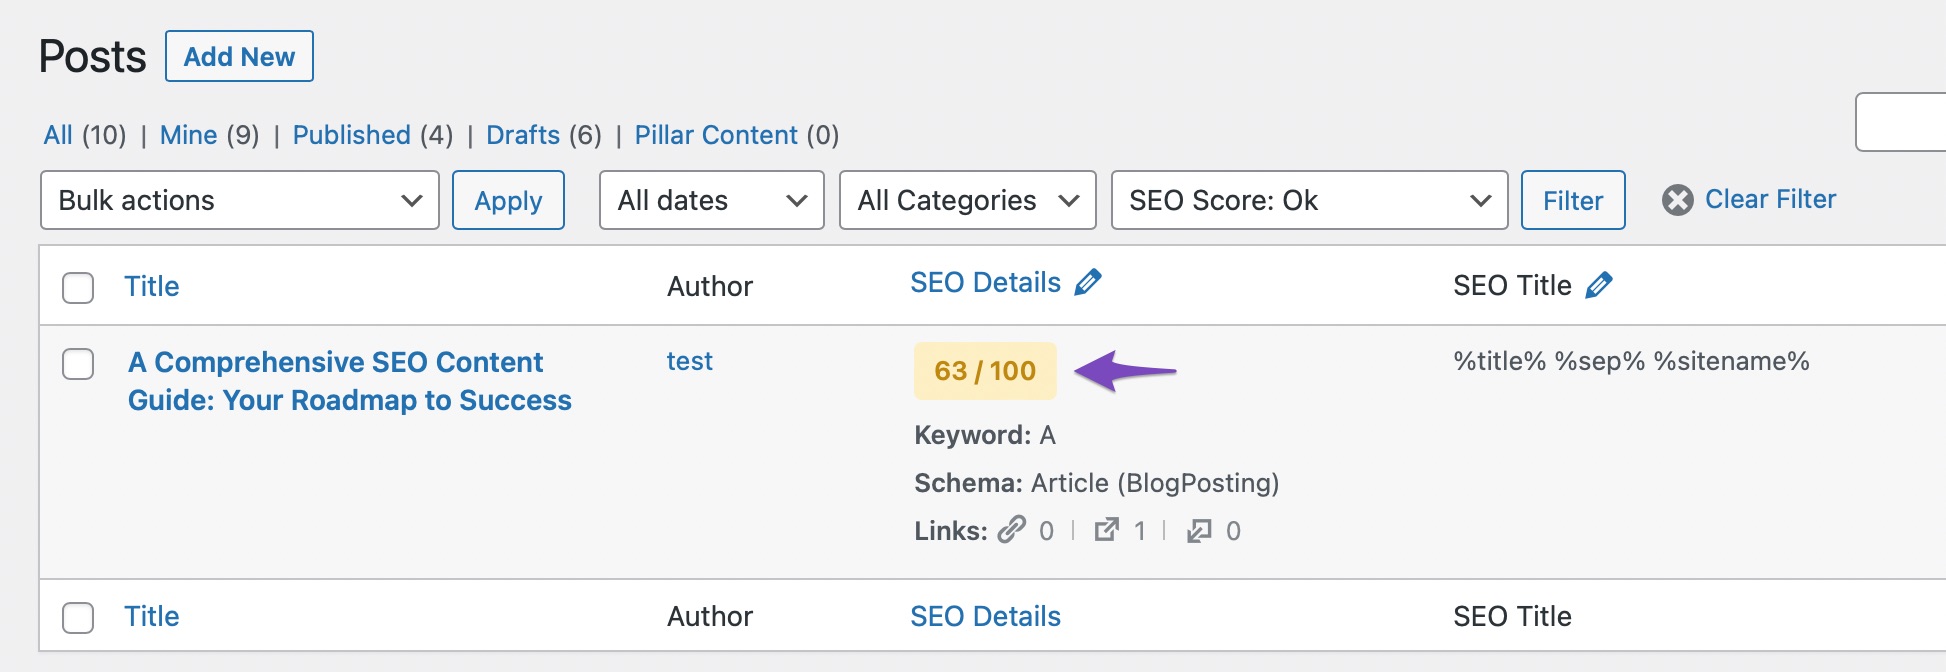 posts filtered by Ok SEO score